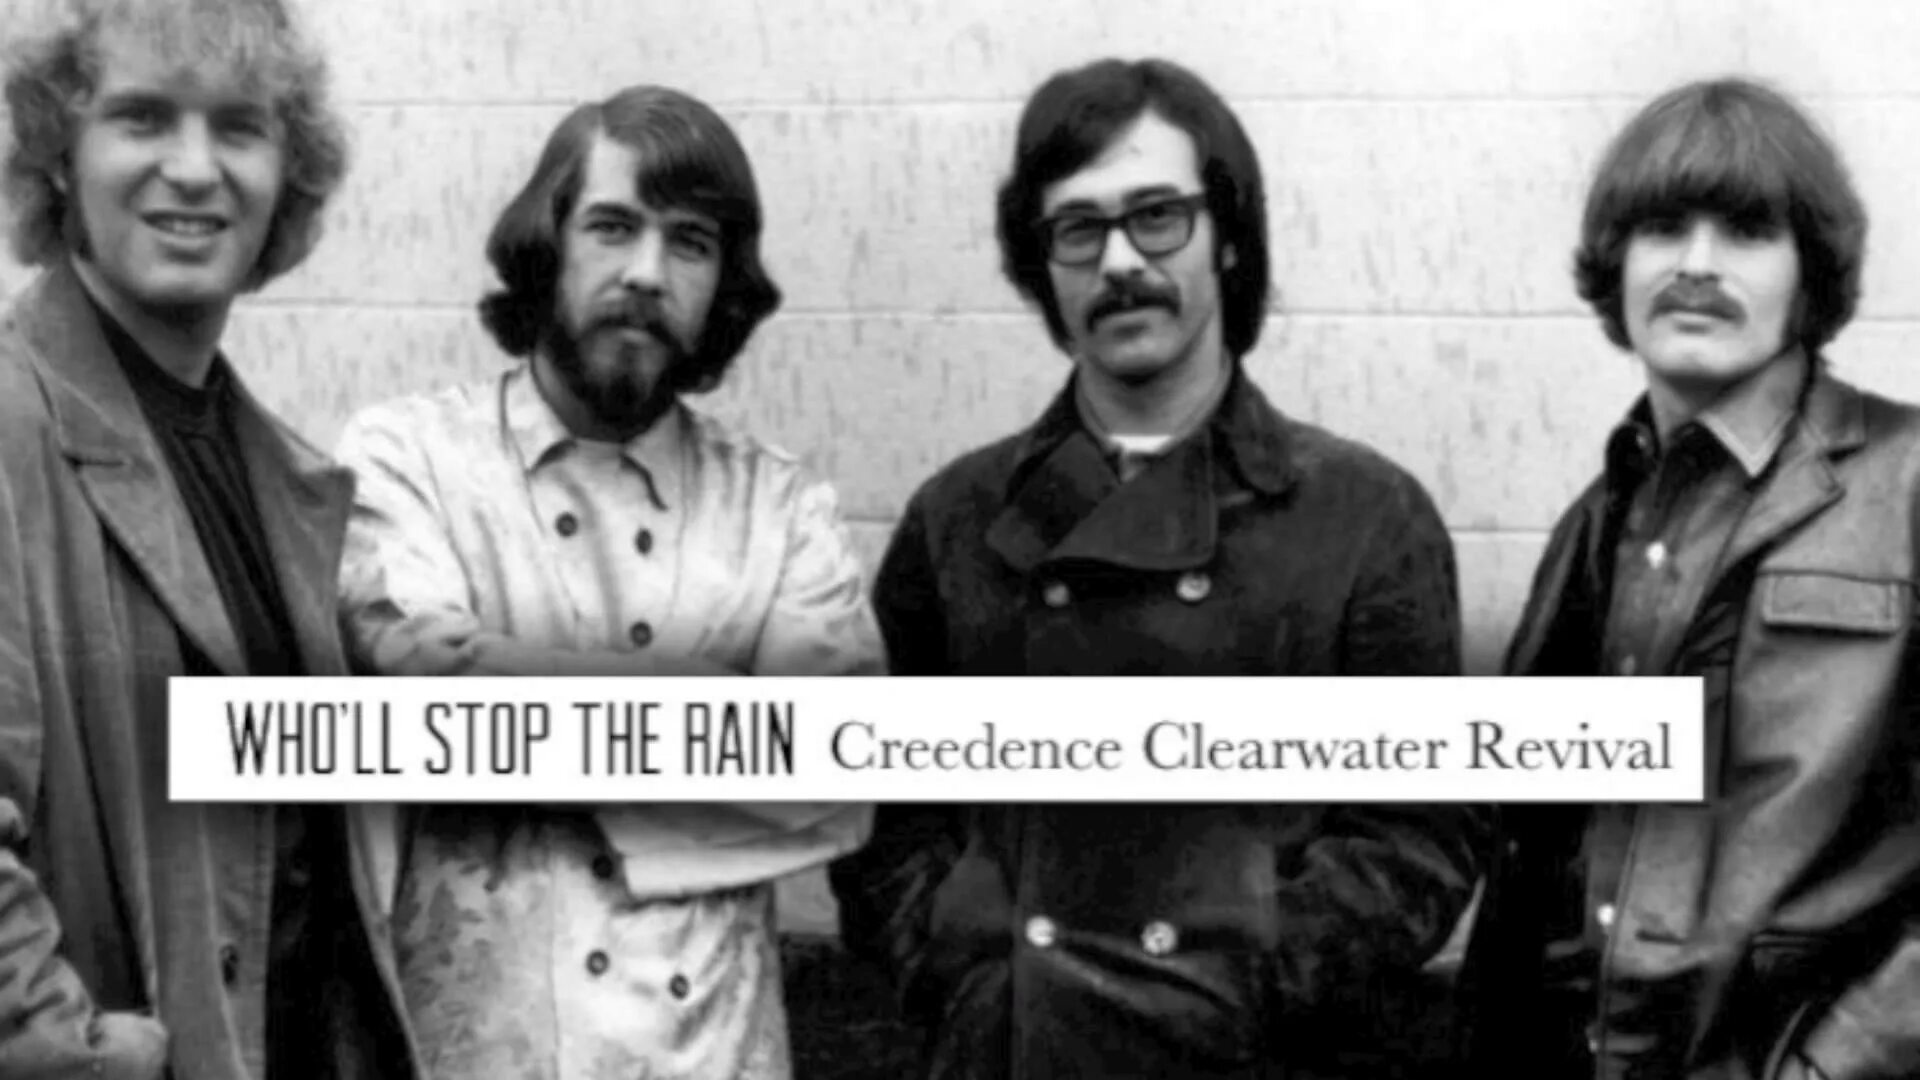 Creedence clearwater revival rain. Группа Криденс. Creedence Clearwater Revived 25.02.2020. Криденс Ньюболд. Who stop the Rain Creedence Clearwater Revival.